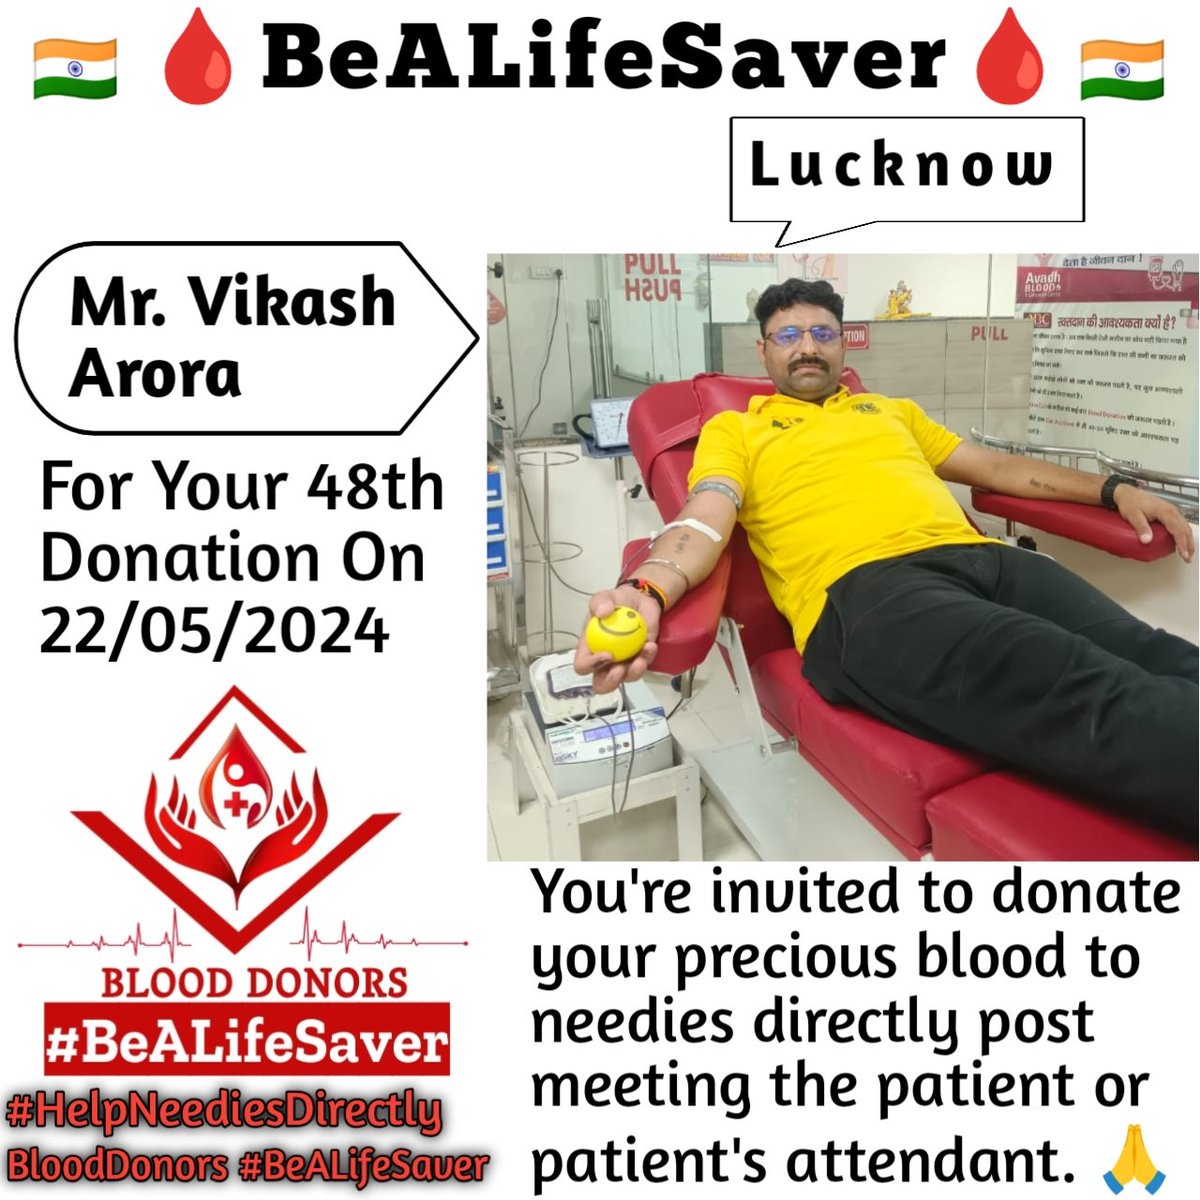 Lucknow BeALifeSaver Kudos_Mr_Vikash_Arora_Ji #HelpNeediesDirectly Today's hero Mr. Vikash_Arora Ji donated blood in Lucknow for the 48th Time for one of the needies. Heartfelt Gratitude and Respect to Vikash Arora Ji for his blood donation for Patient admitted in Lucknow.